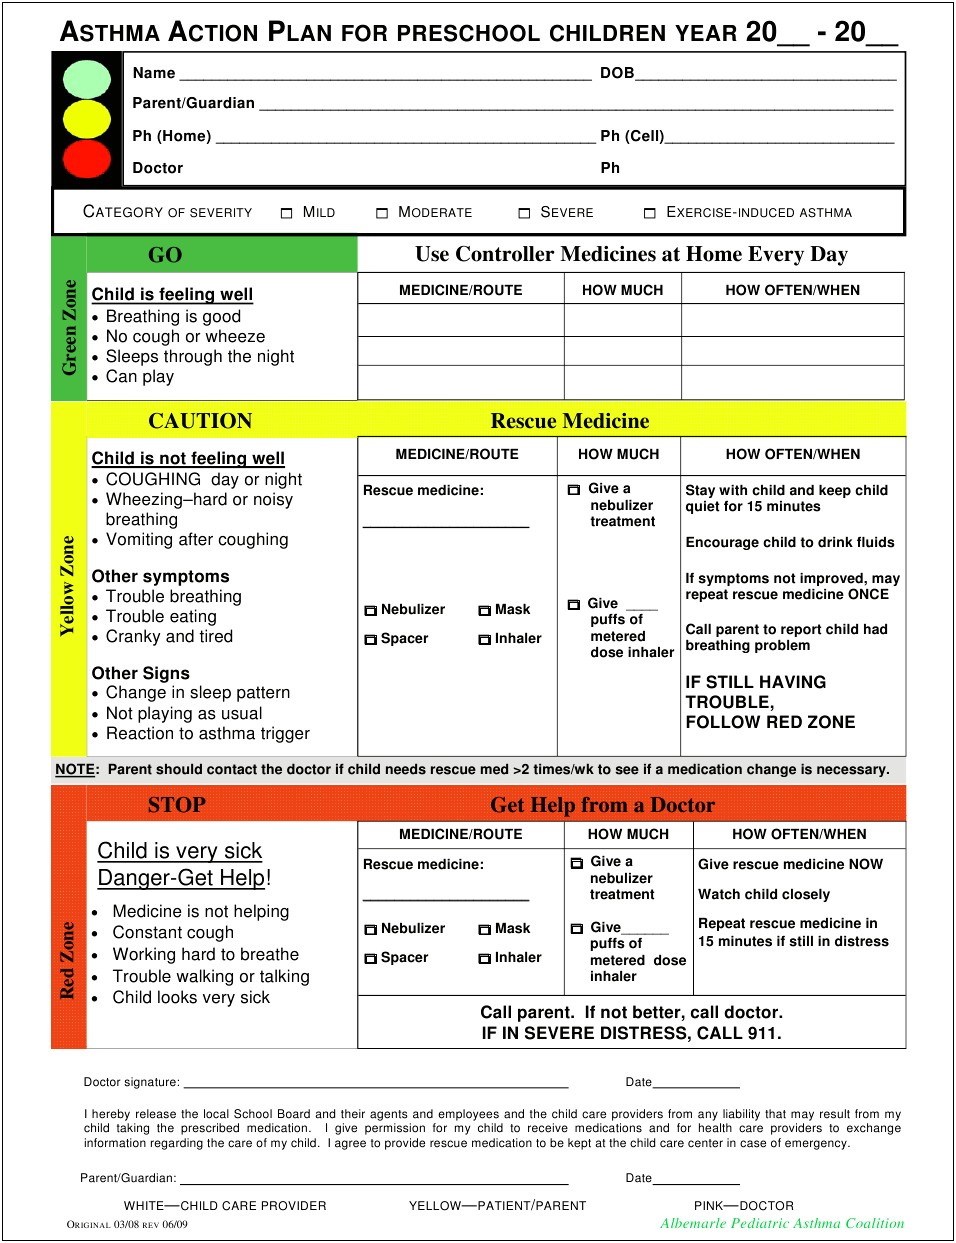 asthma-action-plan-template-free-printable-templates-resume-designs